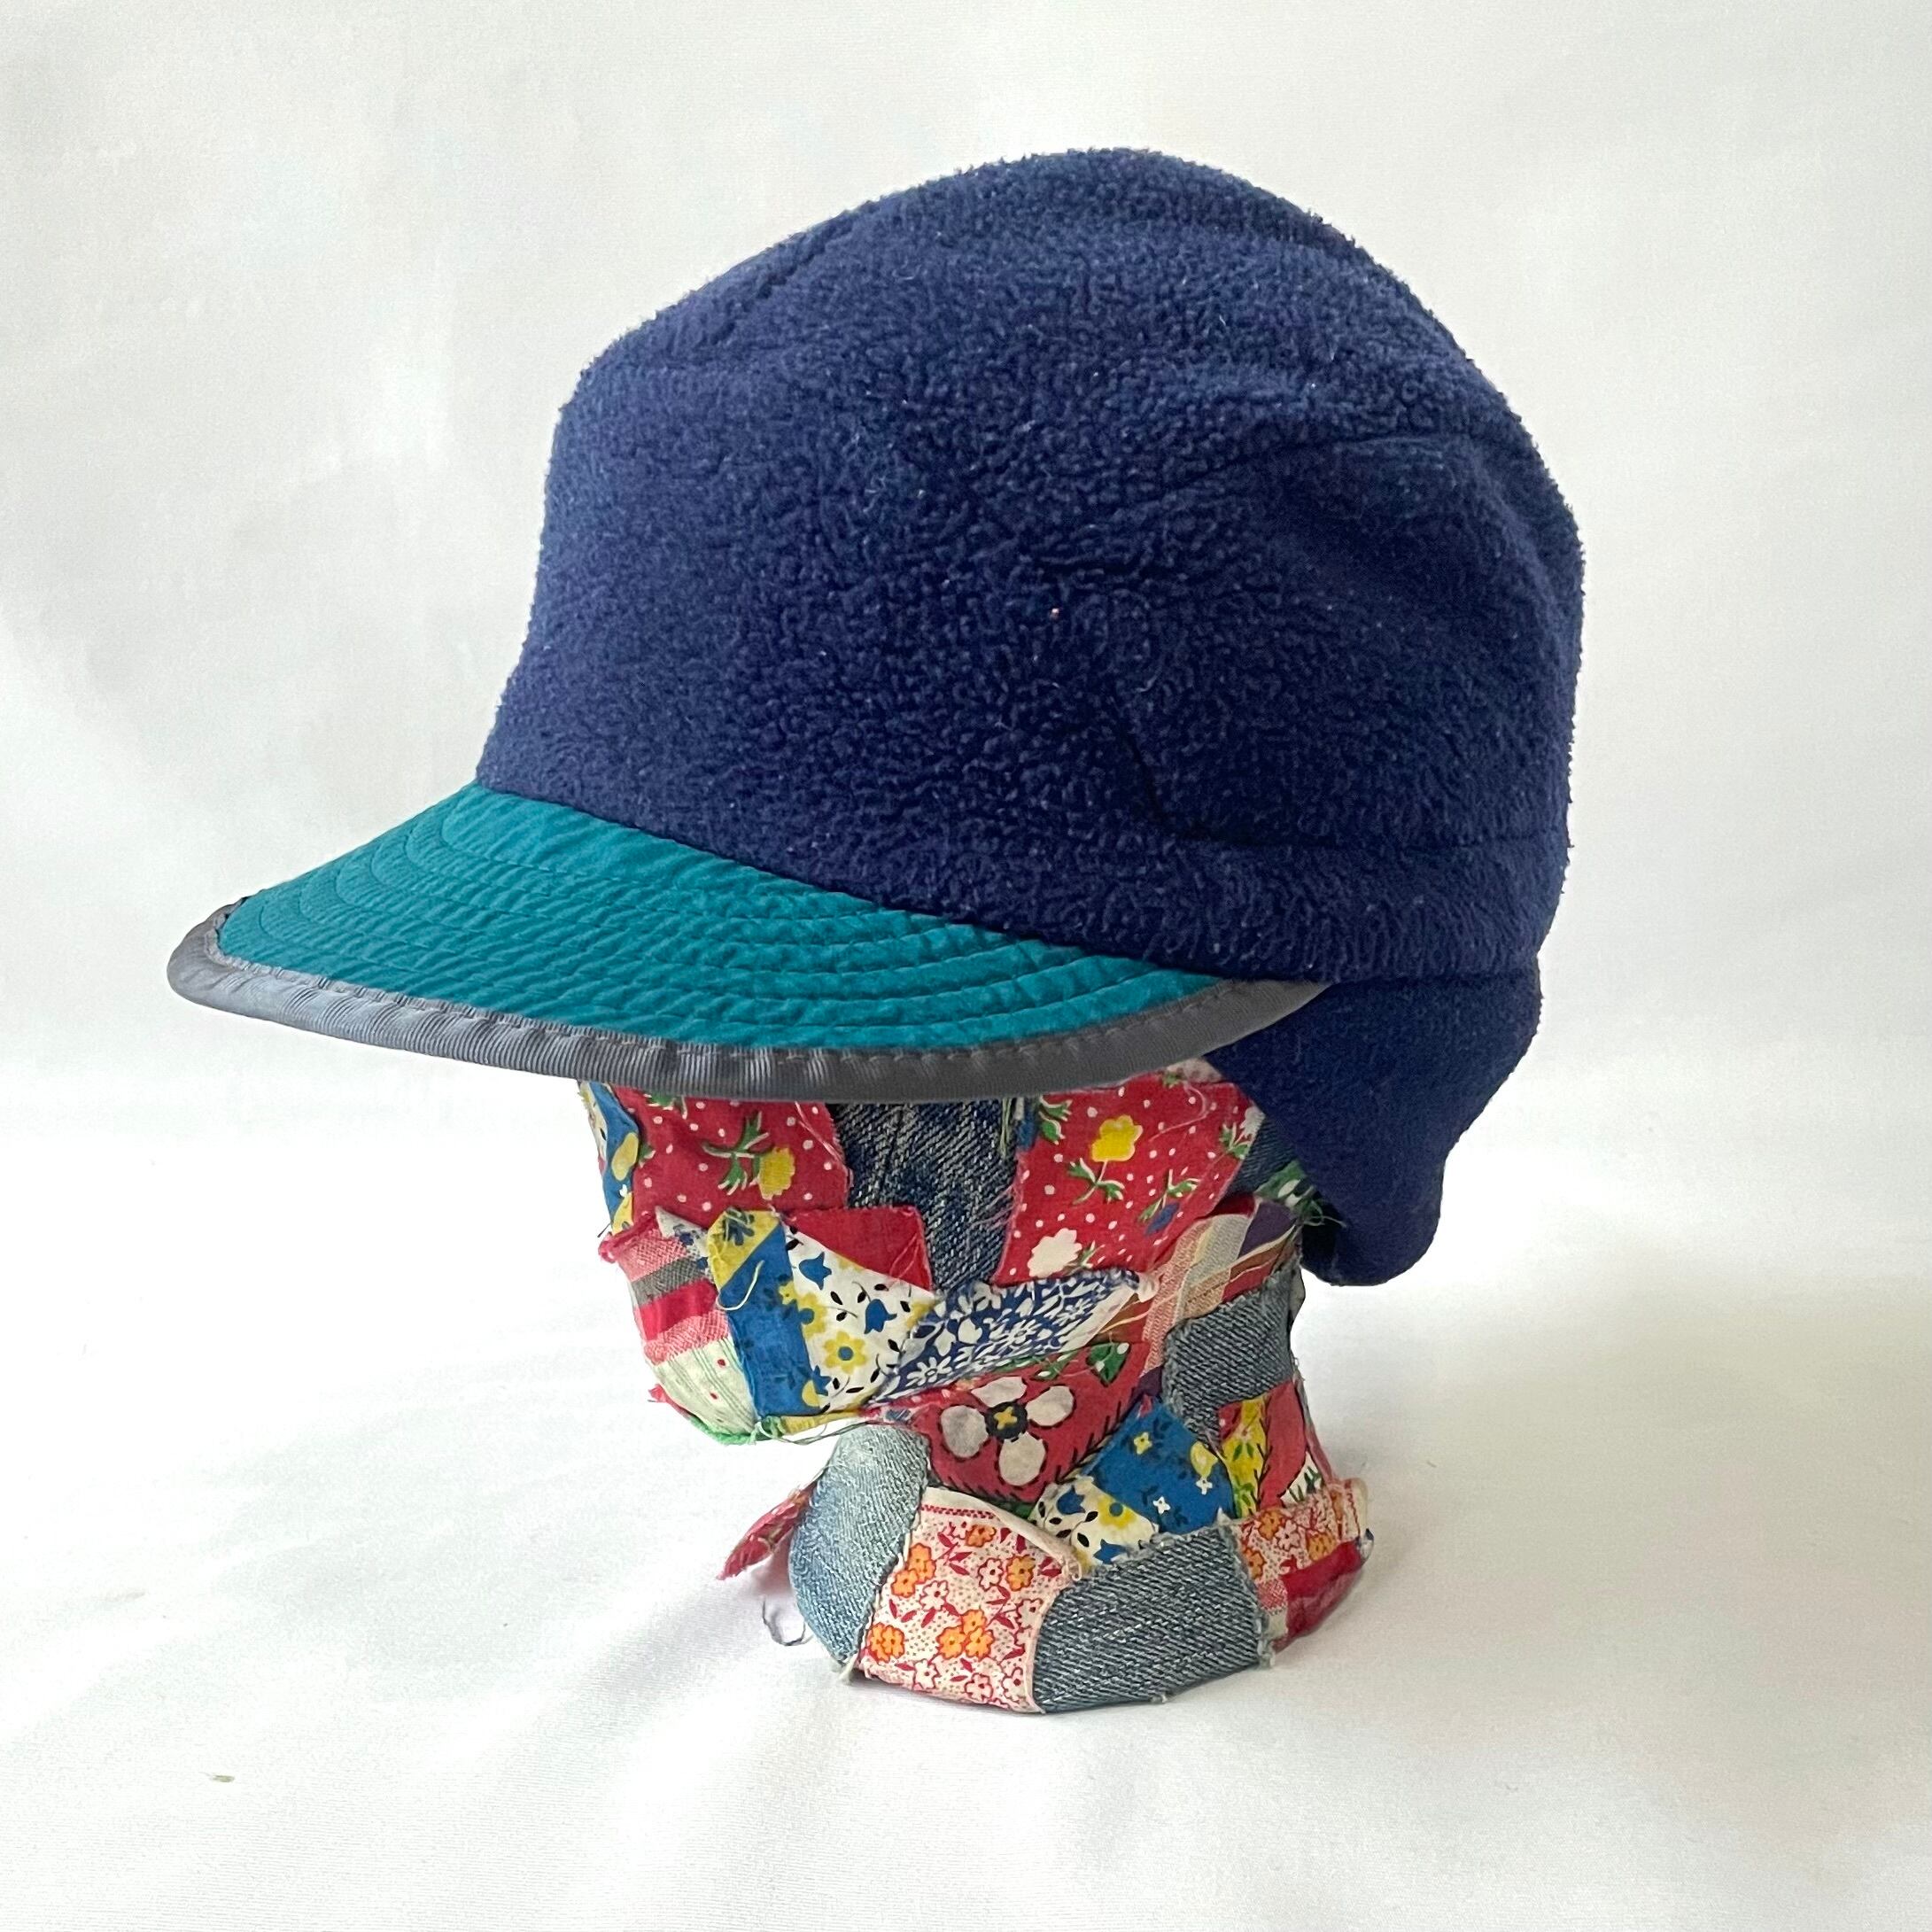 90s Made in USA patagonia duckbill cap アメリカ製パタゴニア 